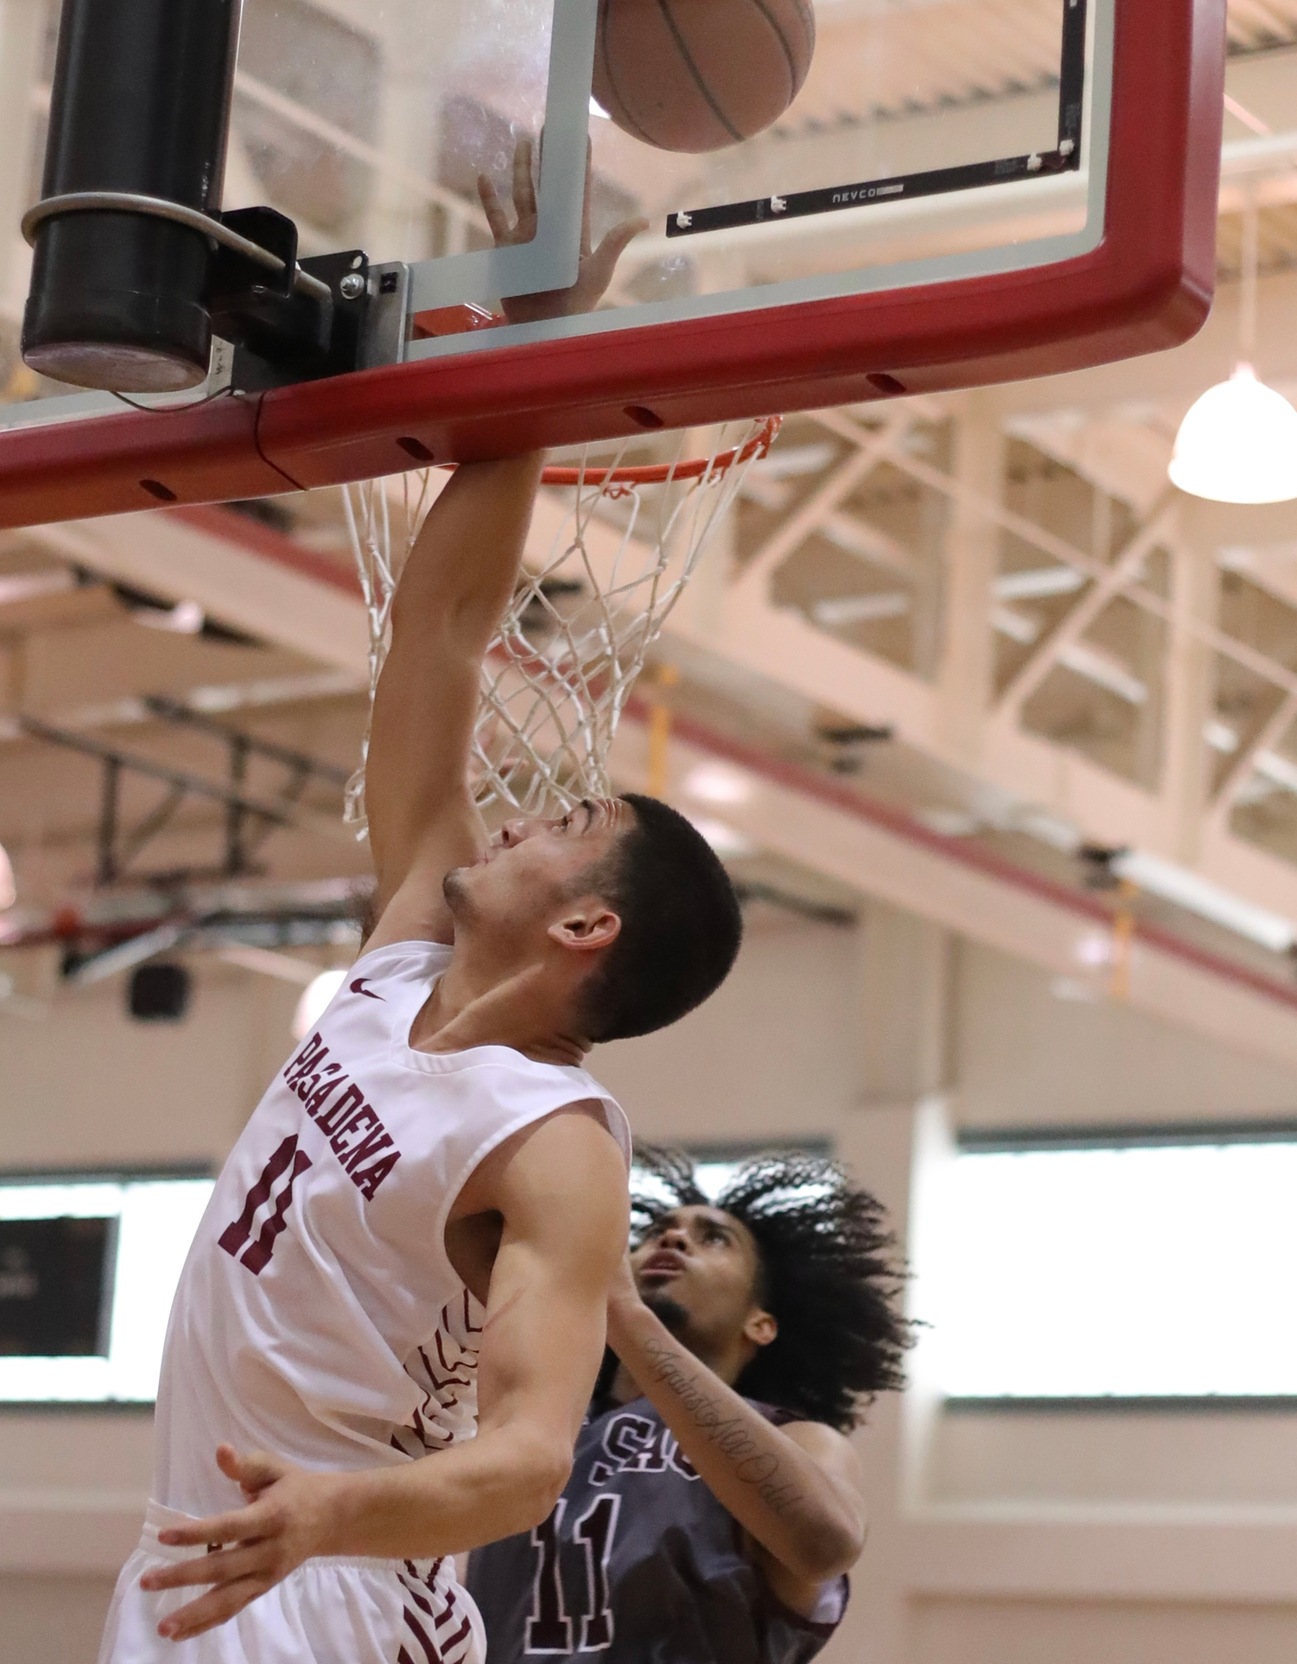 Gabriel Ajemian goes up for the ball during PCC's third-place final win v. Mt. SAC on Saturday at Hutto-Patterson Gymnasium, photo by Michael Watkins.